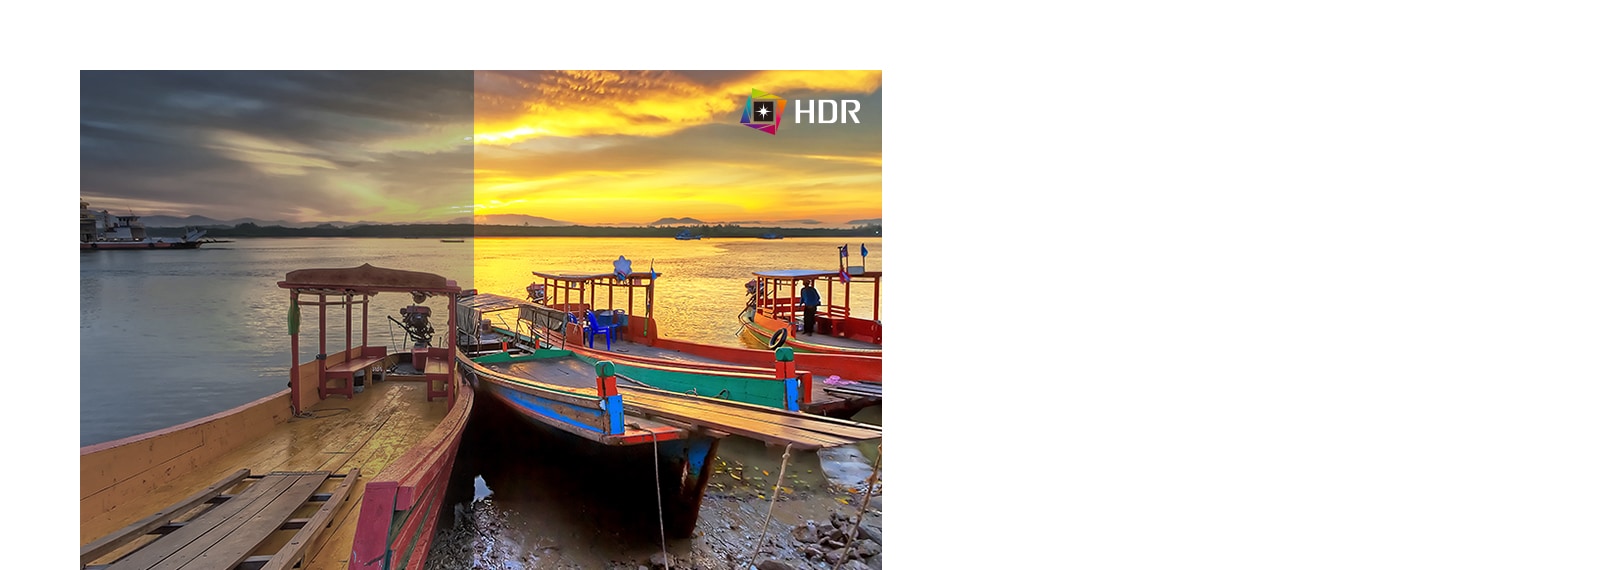 HDR10 with bright color coverage1